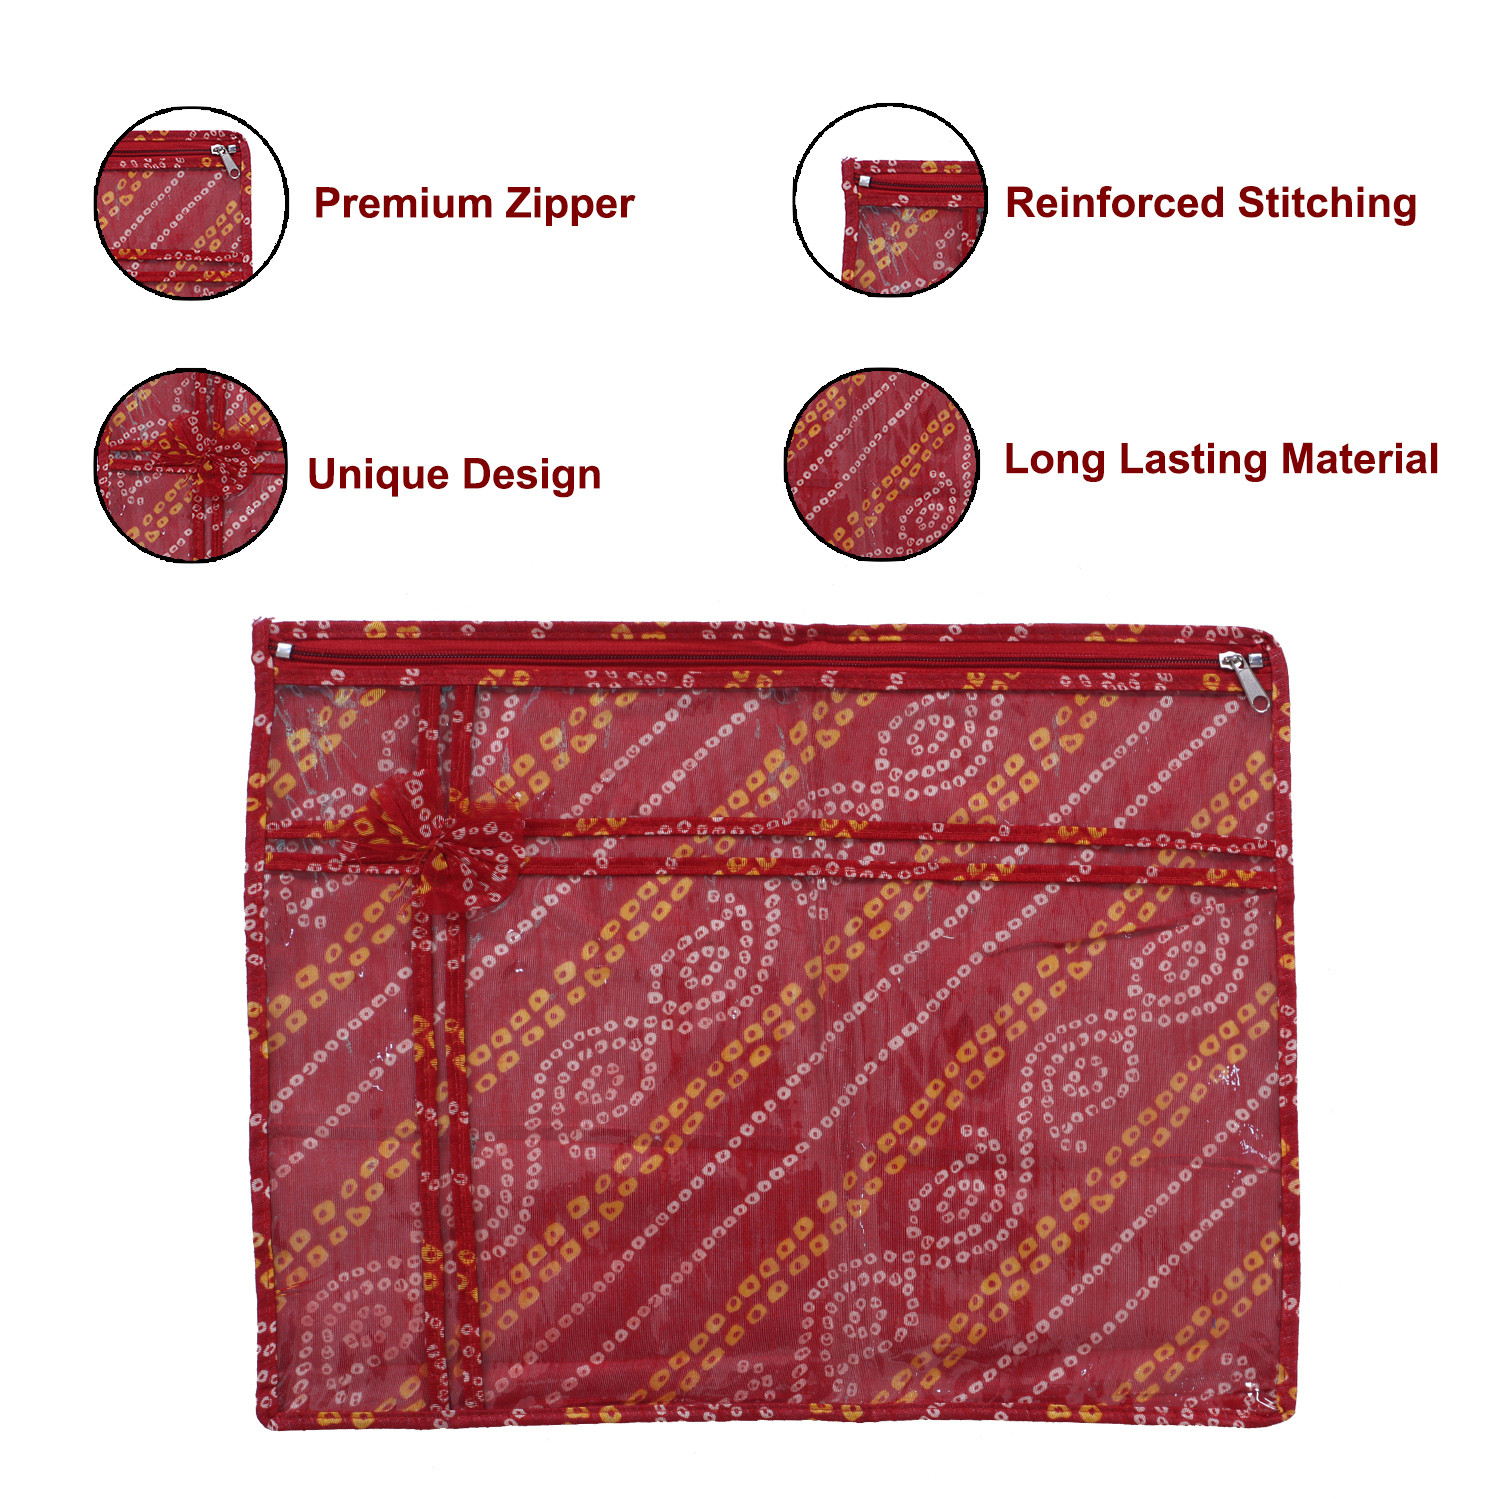 Kuber Industries Bandhani Print PVC Foldable Single Saree Cover|Clothes Storage For Saree, Lehenga, Suit With Transparent (Red)